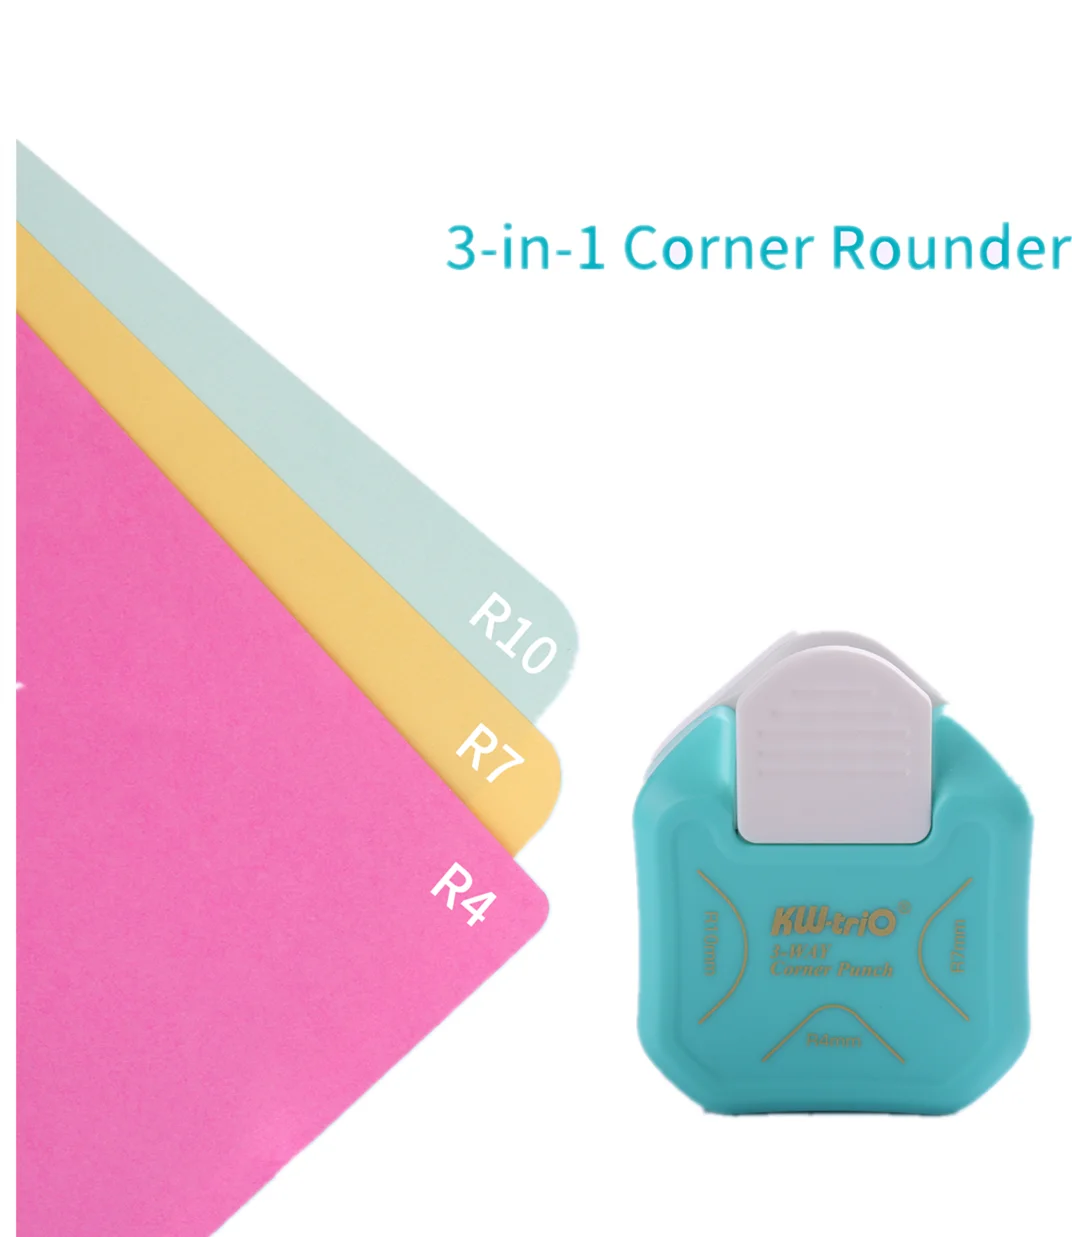 Paper Corner Rounder 3 In 1 （R4mm+R7mm+R10mm）， Corner Punches for Paper  Crafts， Corner Cutter ，Envelope Punch Board ，Hole Puncher， Laminate, DIY  Projects, Photo Cutter,Card Making and Scrapbooking 